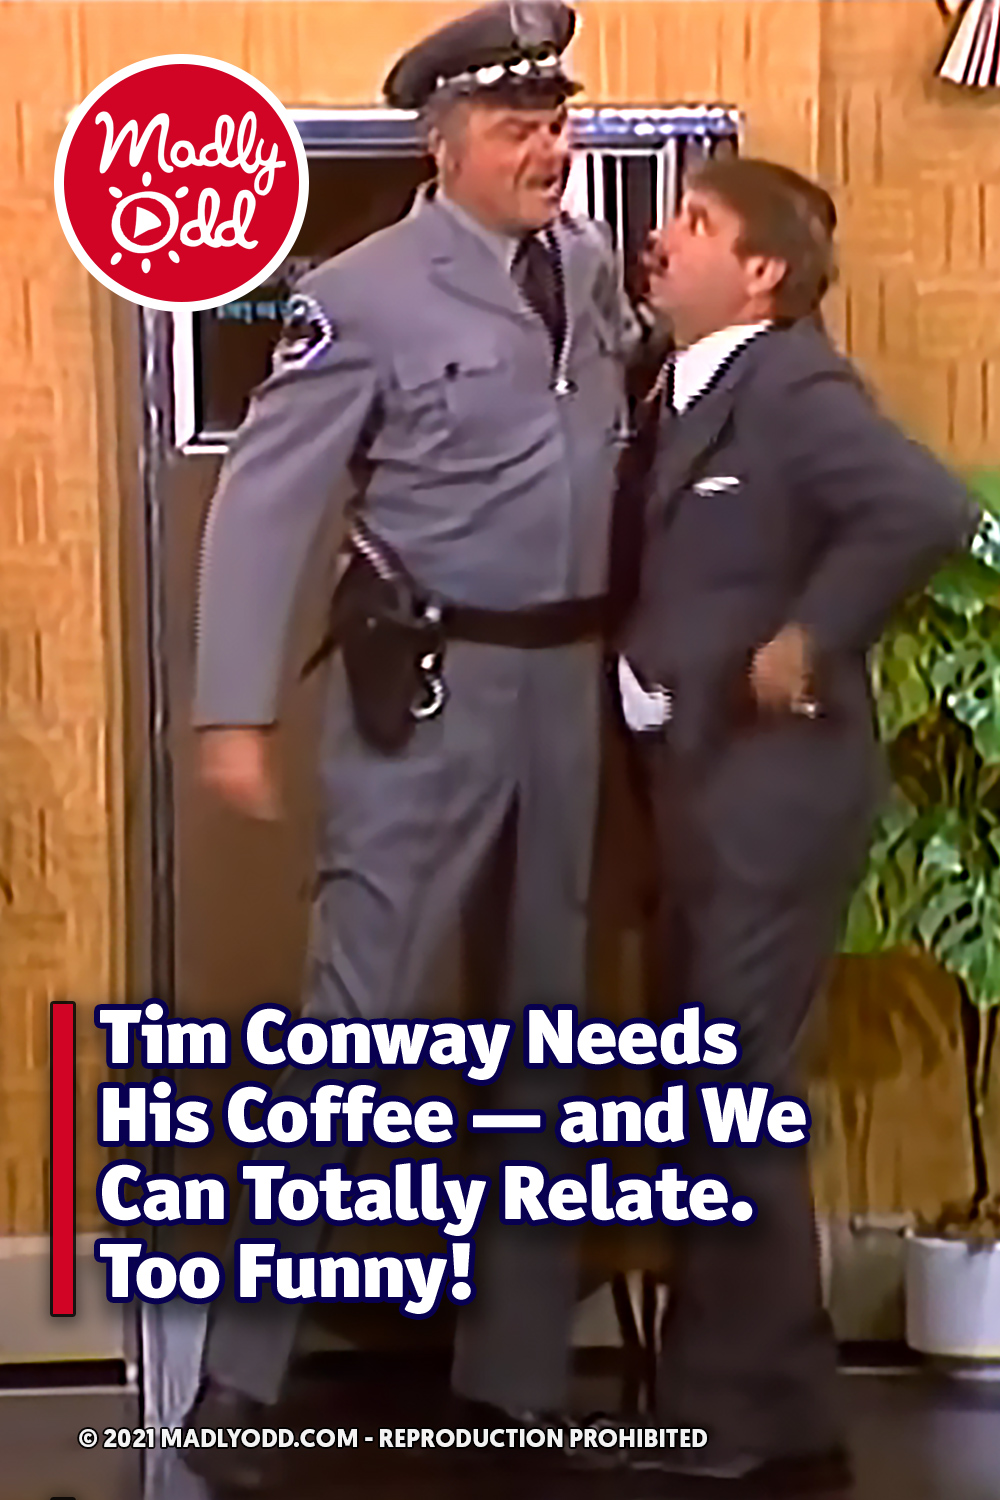 Tim Conway Needs His Coffee -- and We Can Totally Relate. Too Funny!